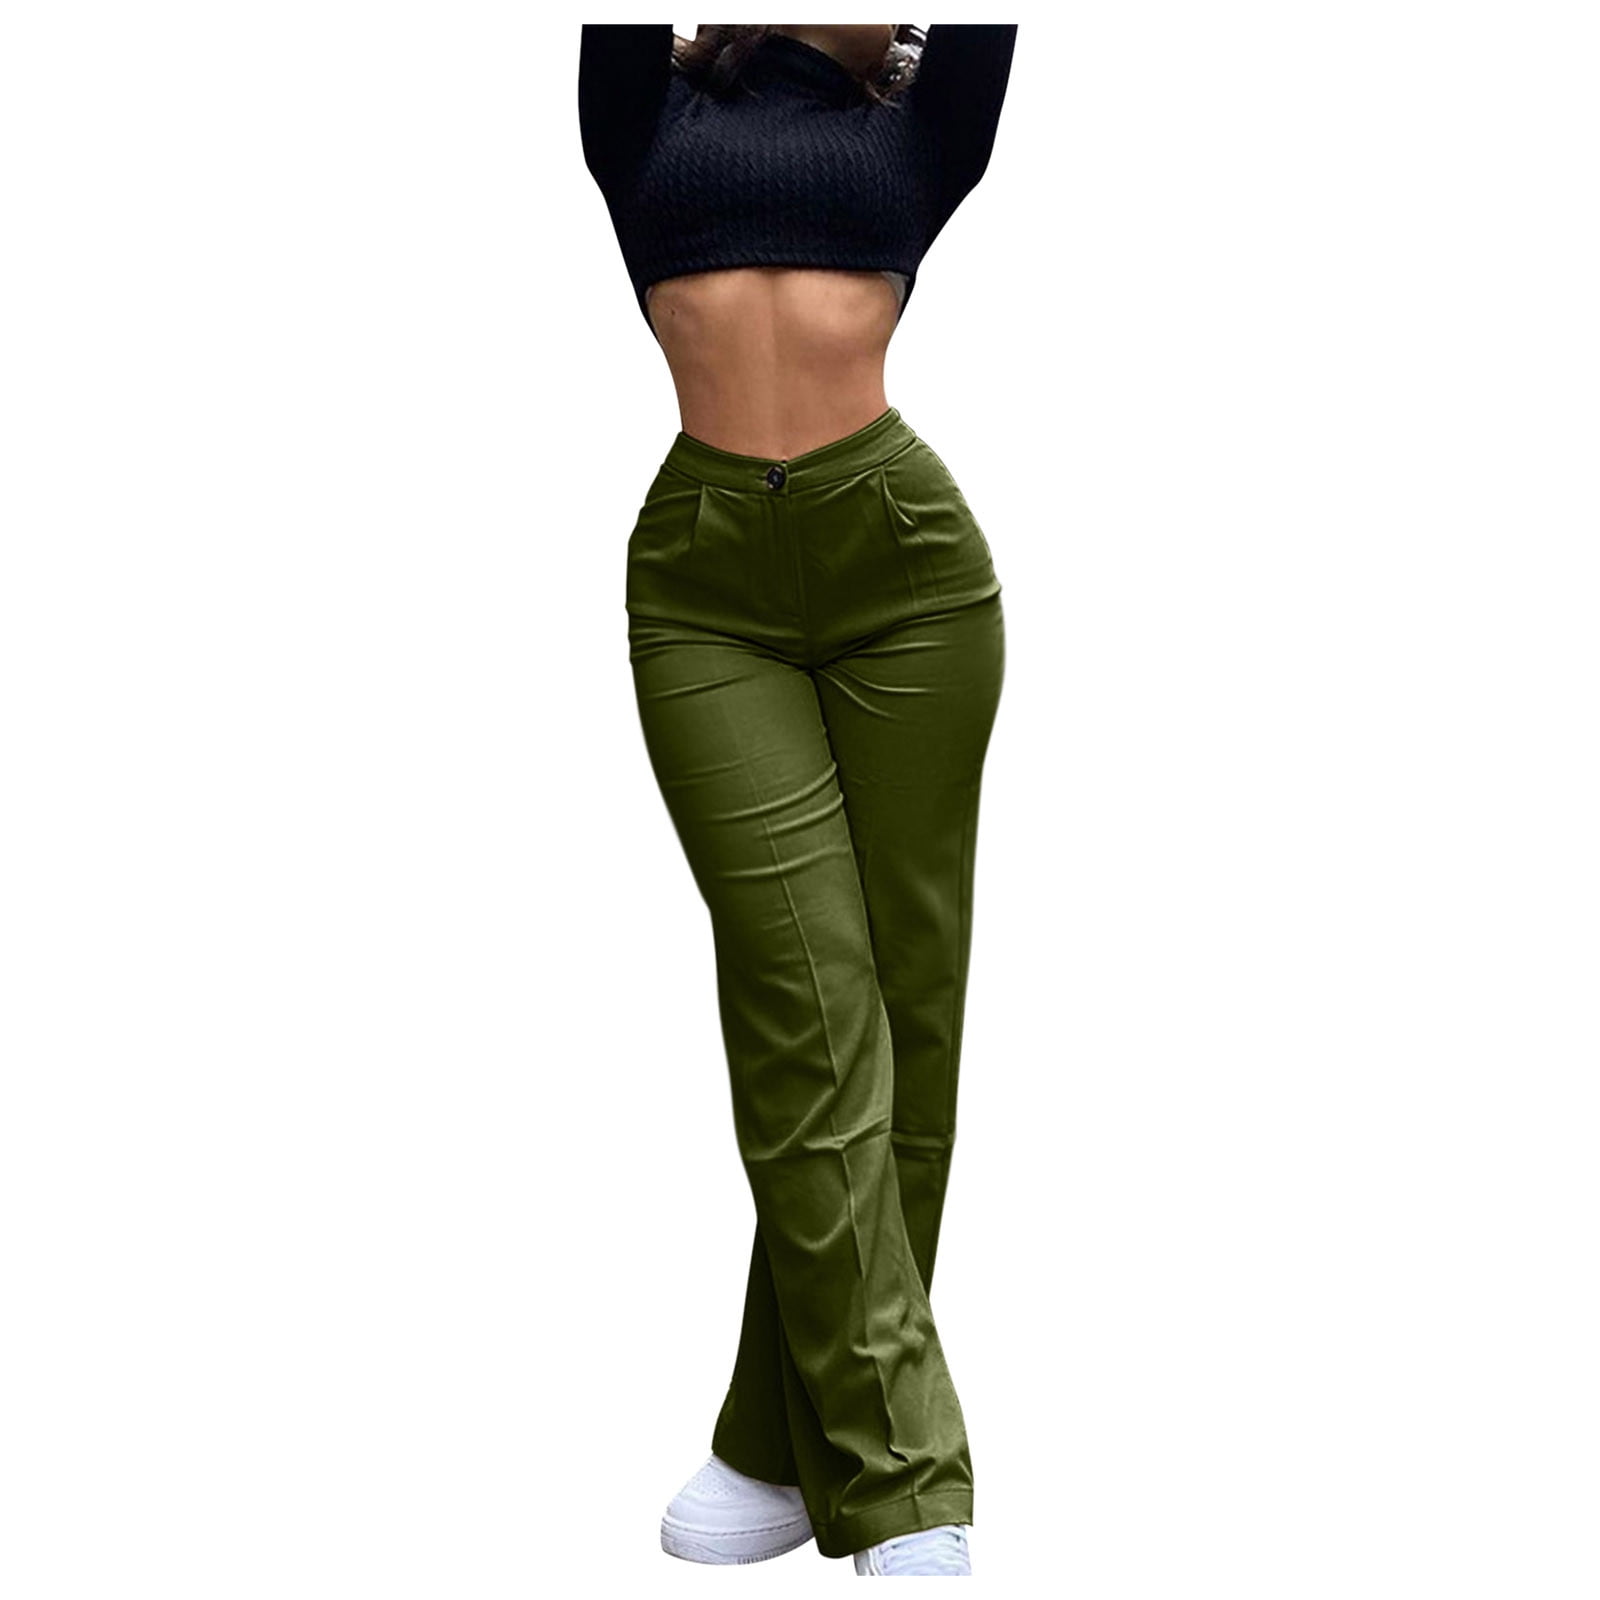 Flare Work Pants You Need! - Oh What A Sight To See  Work pants women,  Elegant pants outfit, Pants outfit work